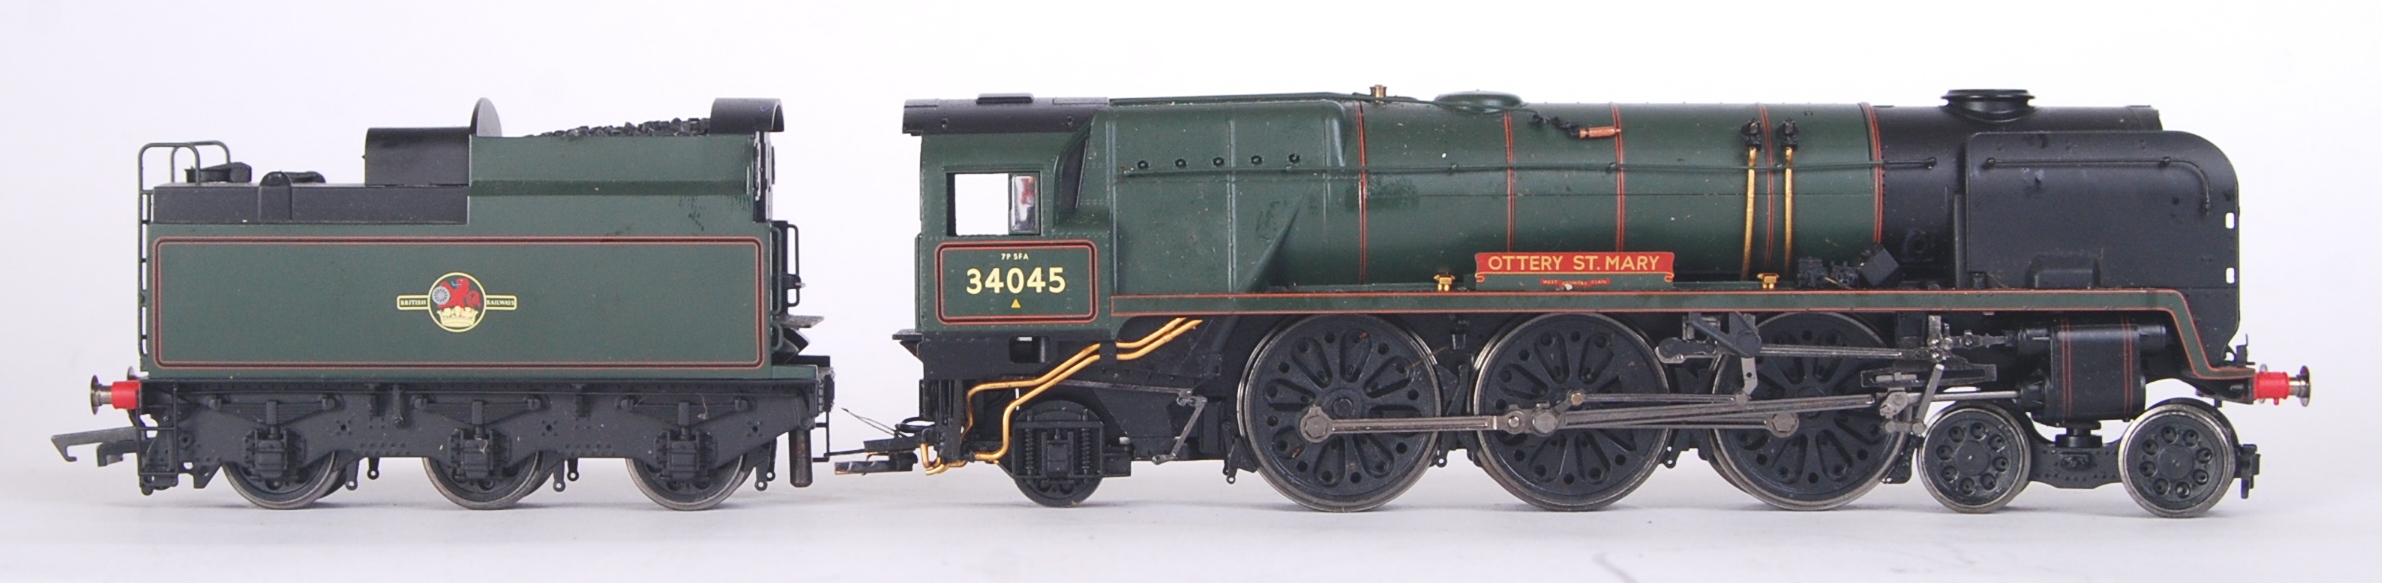 HORNBY - Image 2 of 3